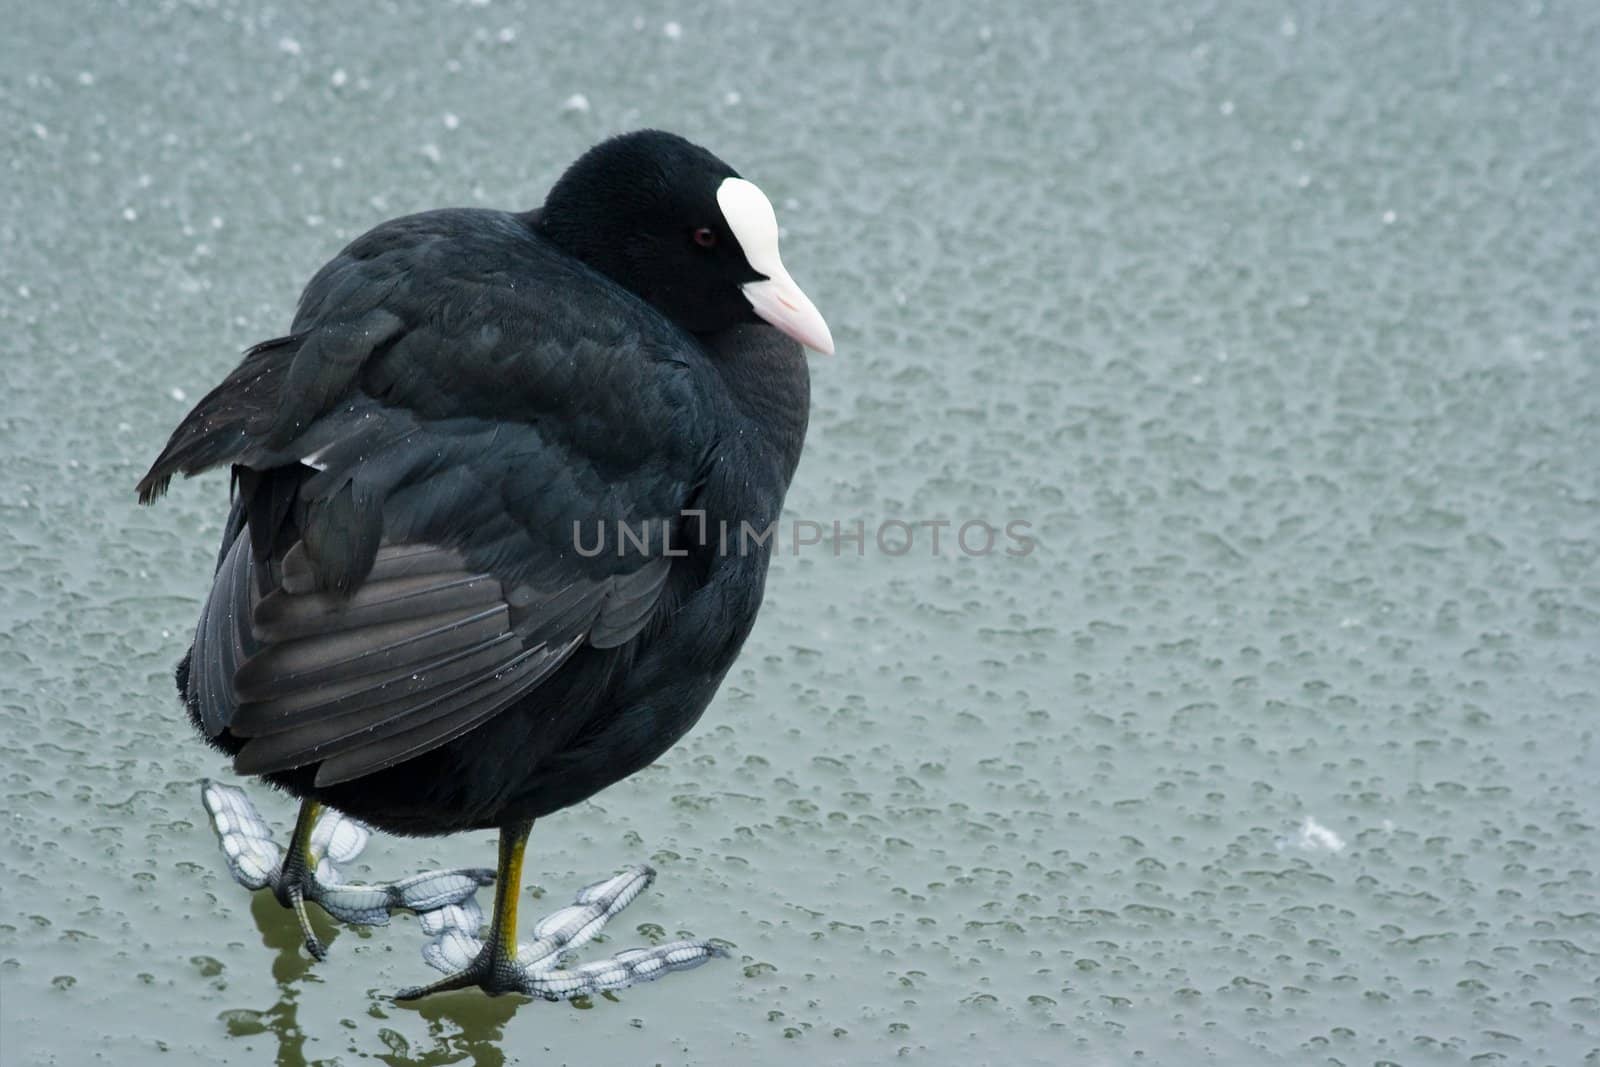 Coot unhappy and cold in winter by Colette